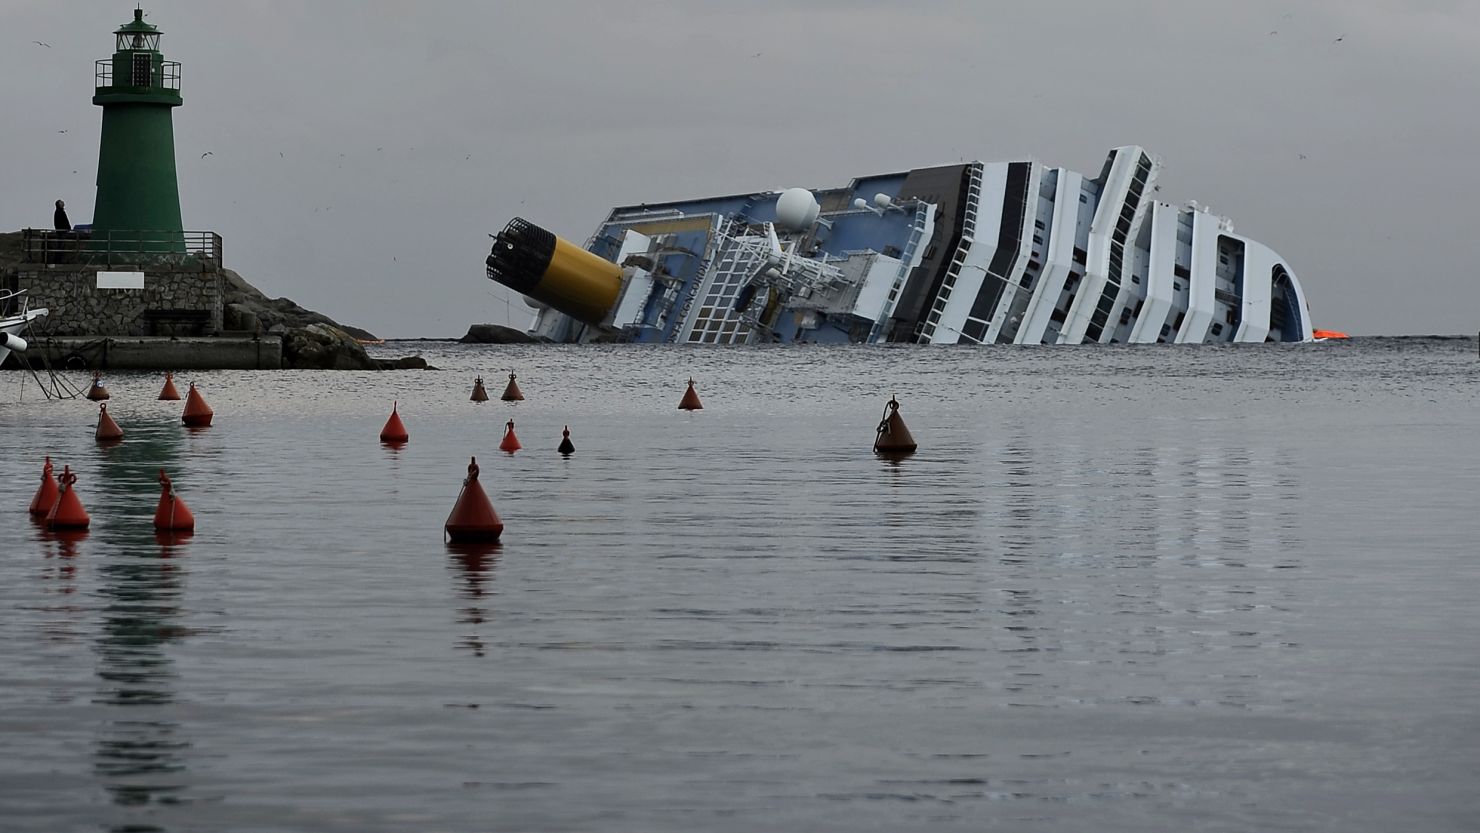 A view of the stricken luxury liner Costa Concordia off the Isola del Giglio on January 22, 2012.